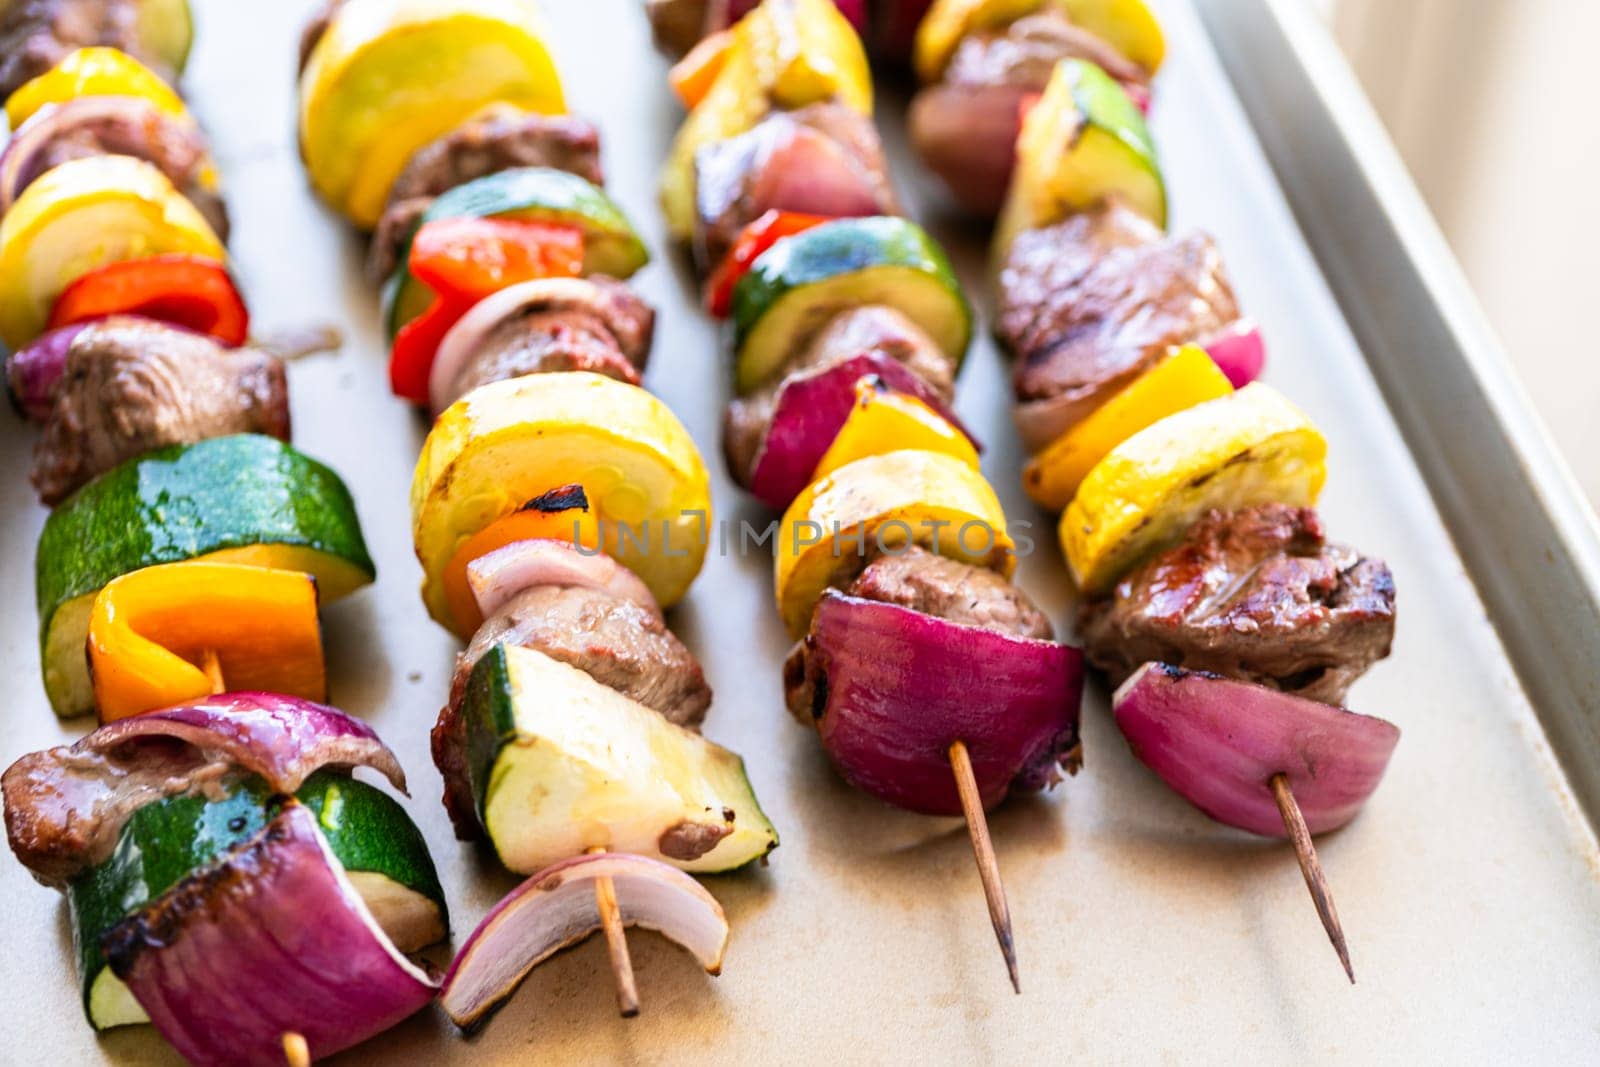 Grill Delights-Beef and Veggies Sizzling on Skewer by arinahabich